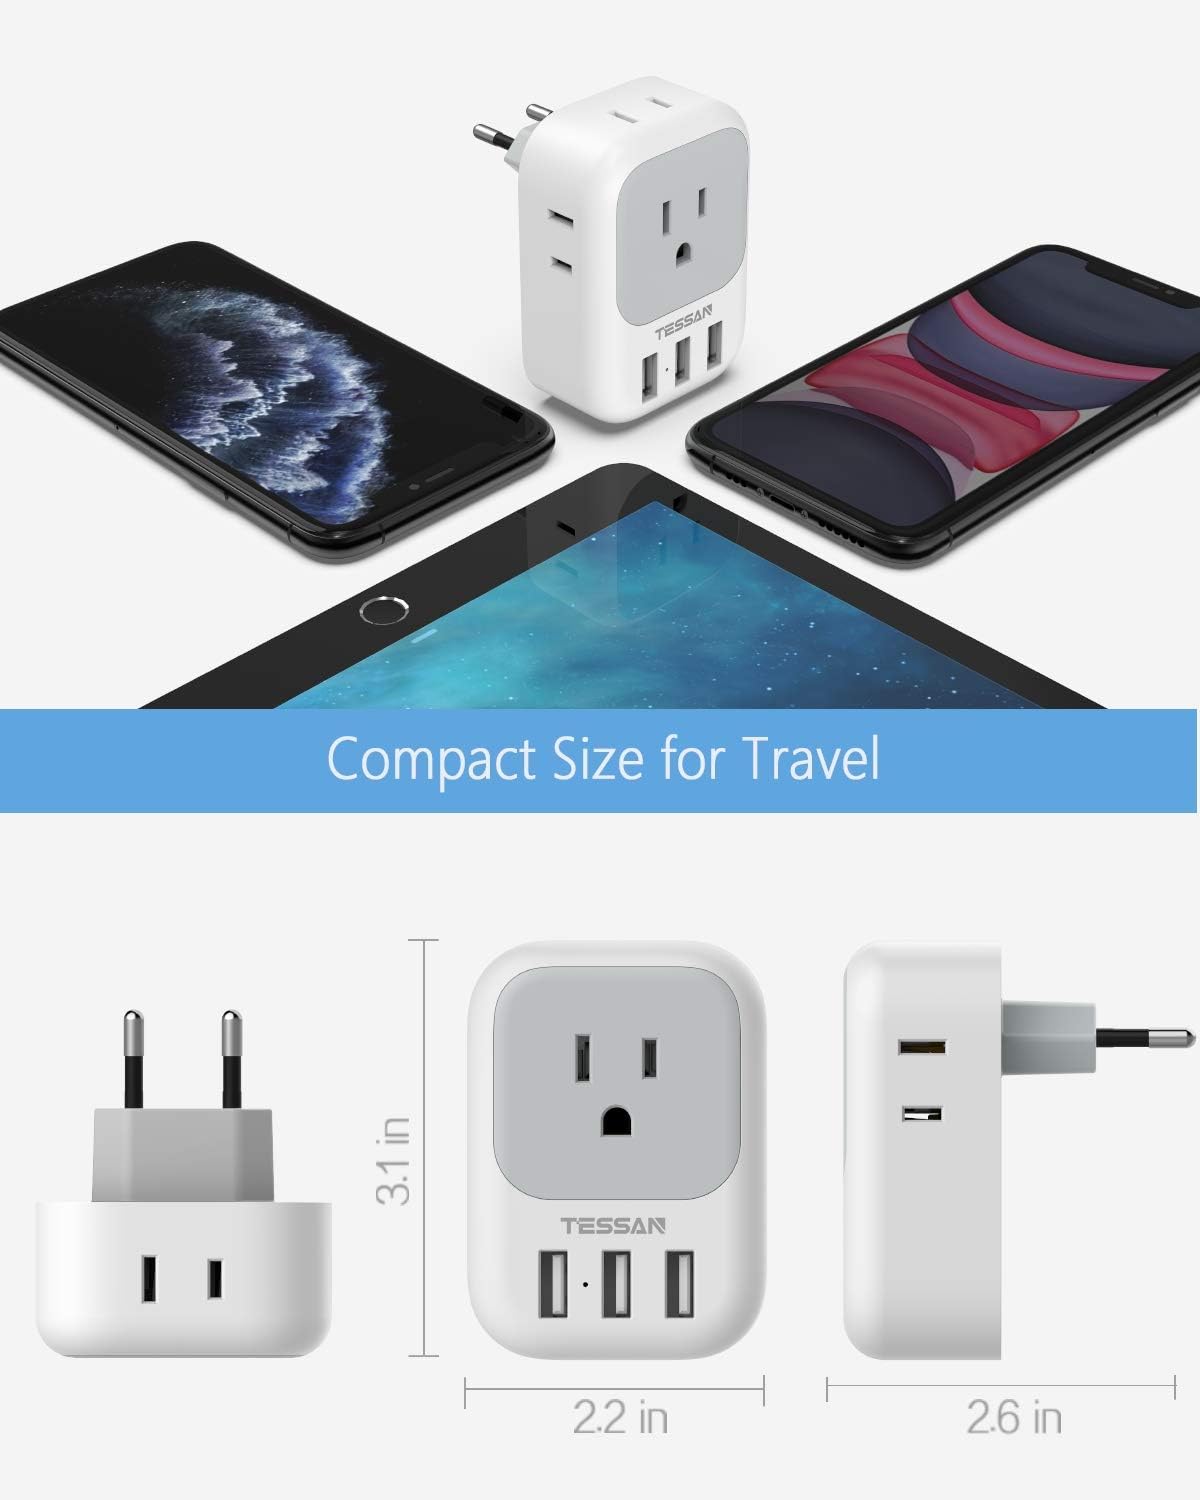 Compact Size for Travel